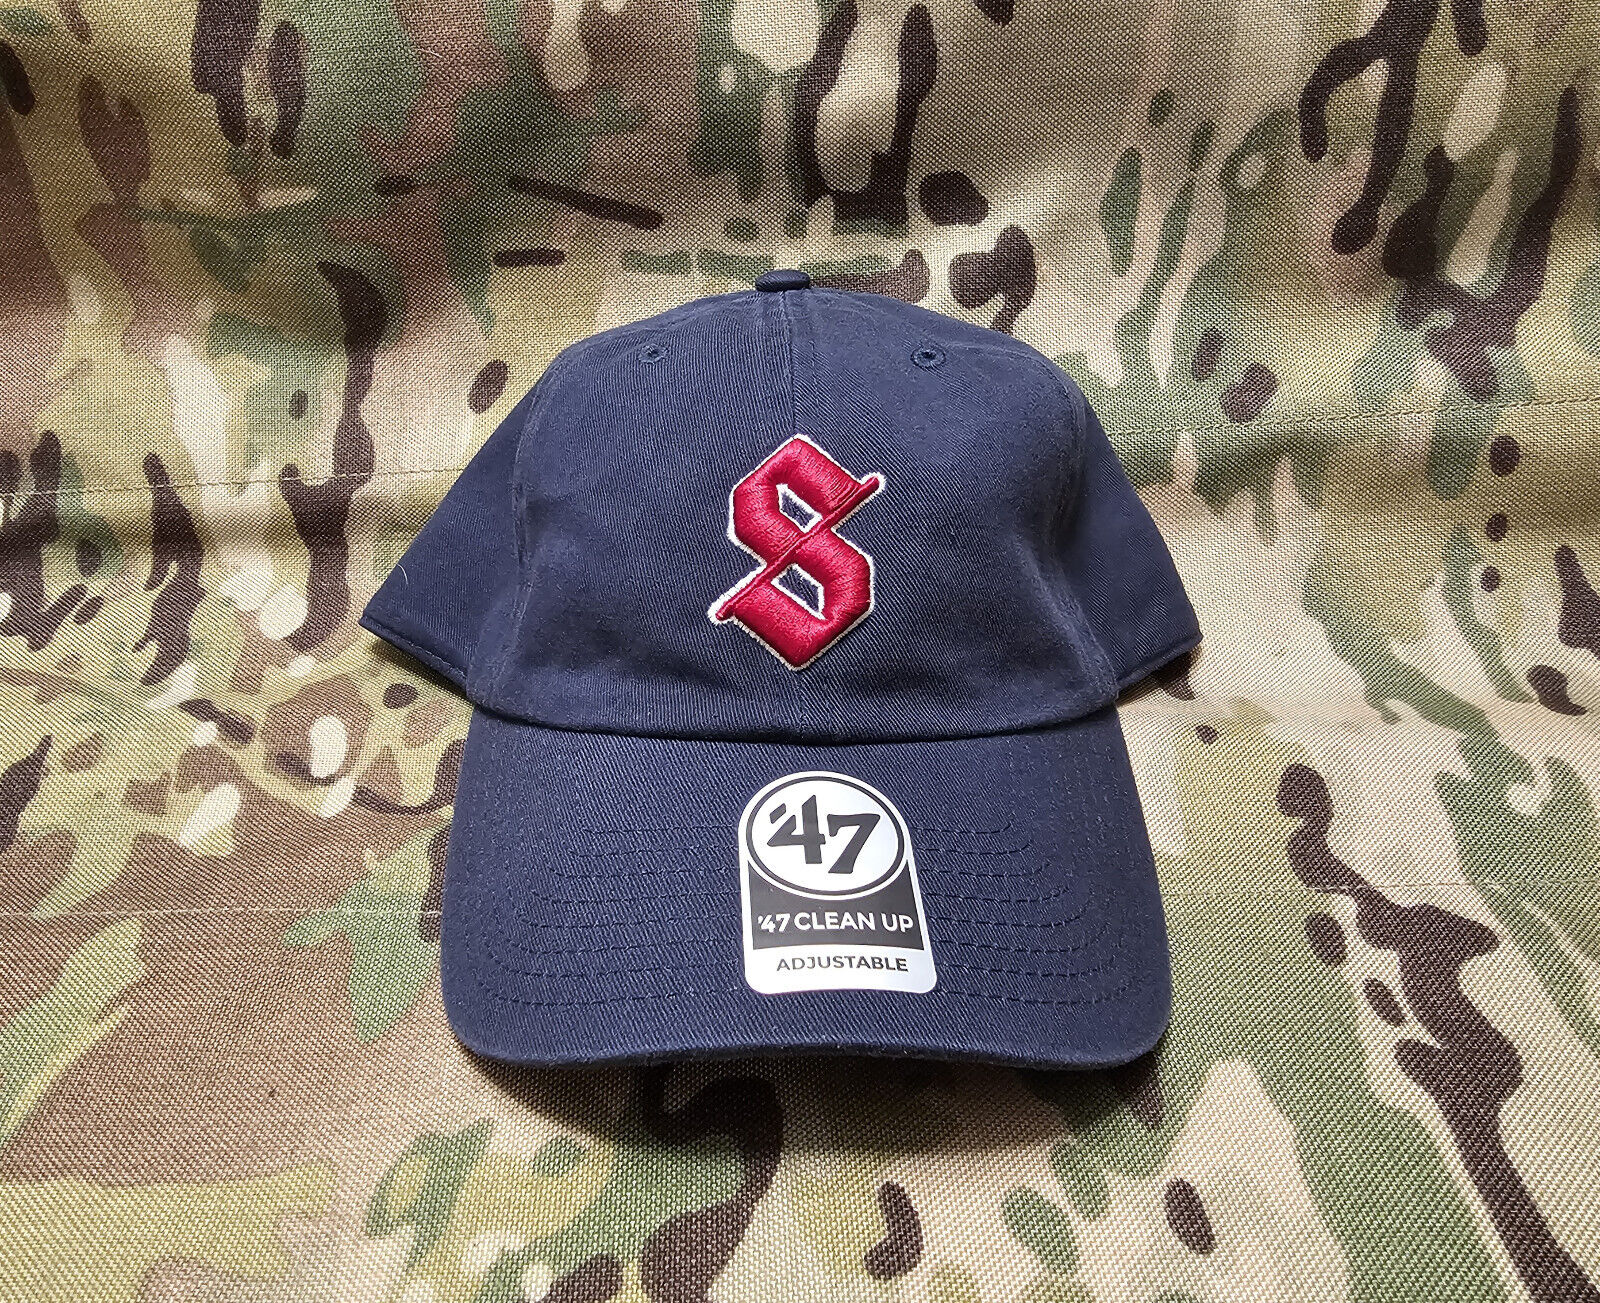 Spiritus Systems - Motto Ball Cap - Embroidered '47 Clean Up - NOT SupDef WRMFZY